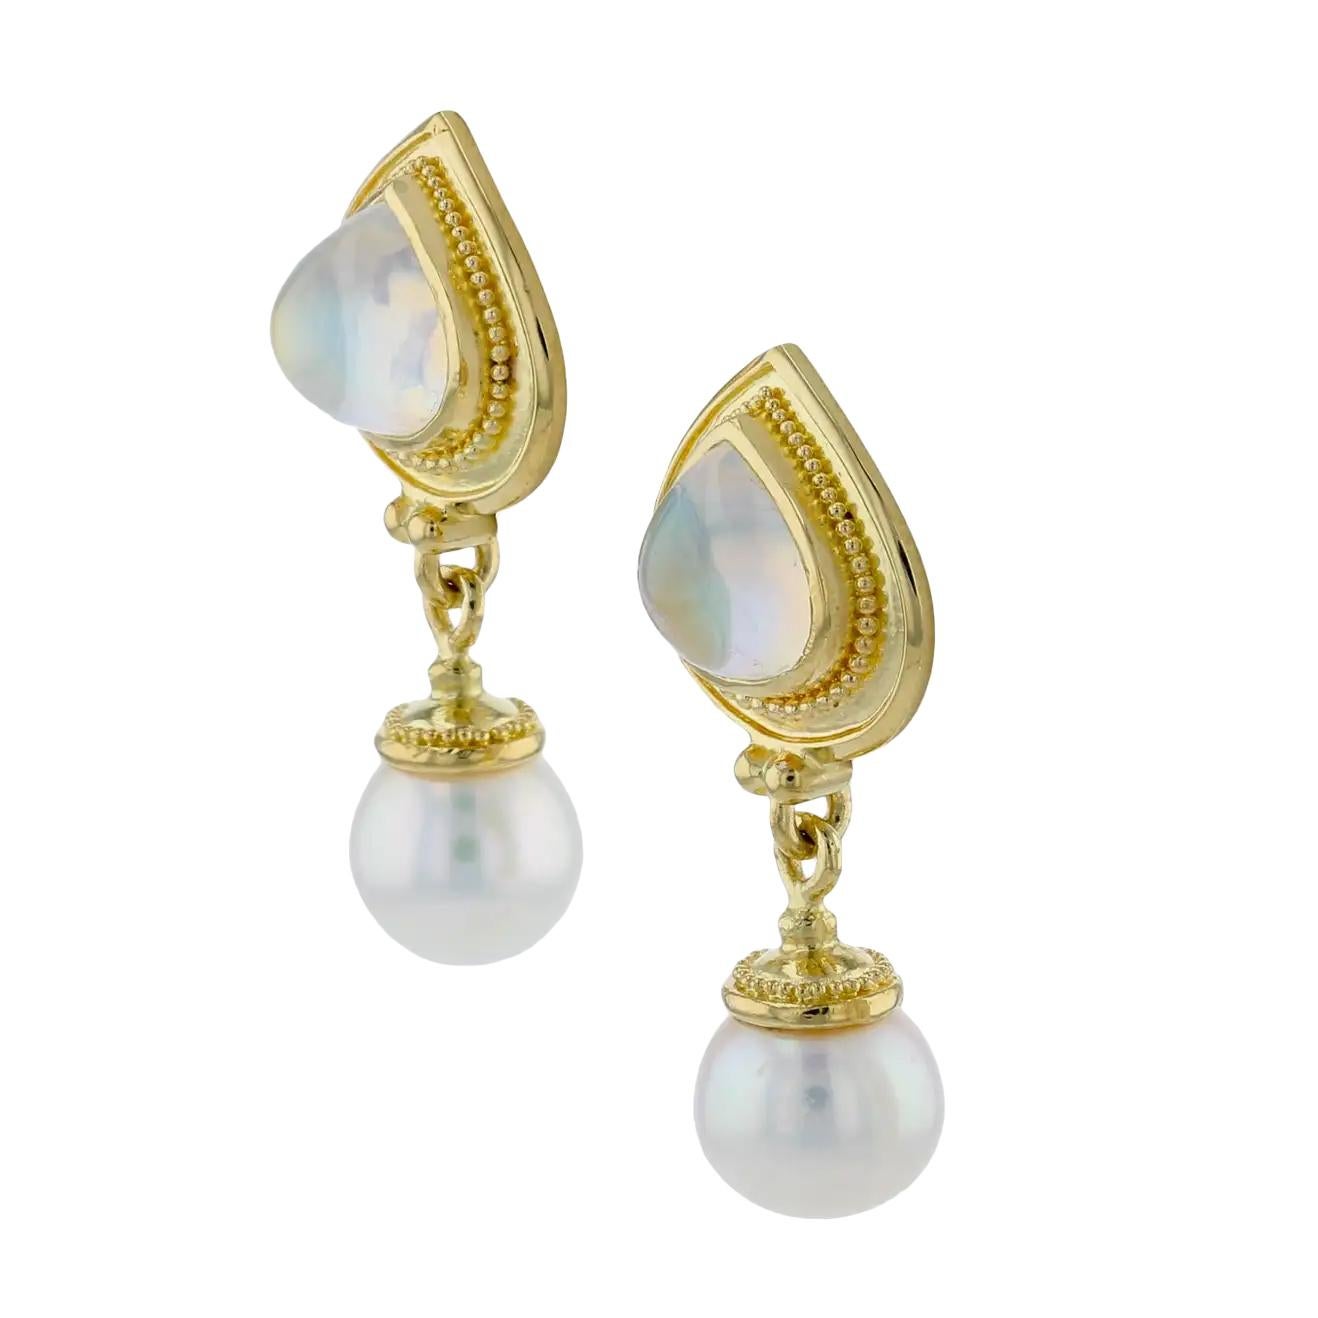 Kent Raible 18 Karat Gold Moonstone and Pearls Drop Earrings with Granulation In New Condition For Sale In Mossrock, WA